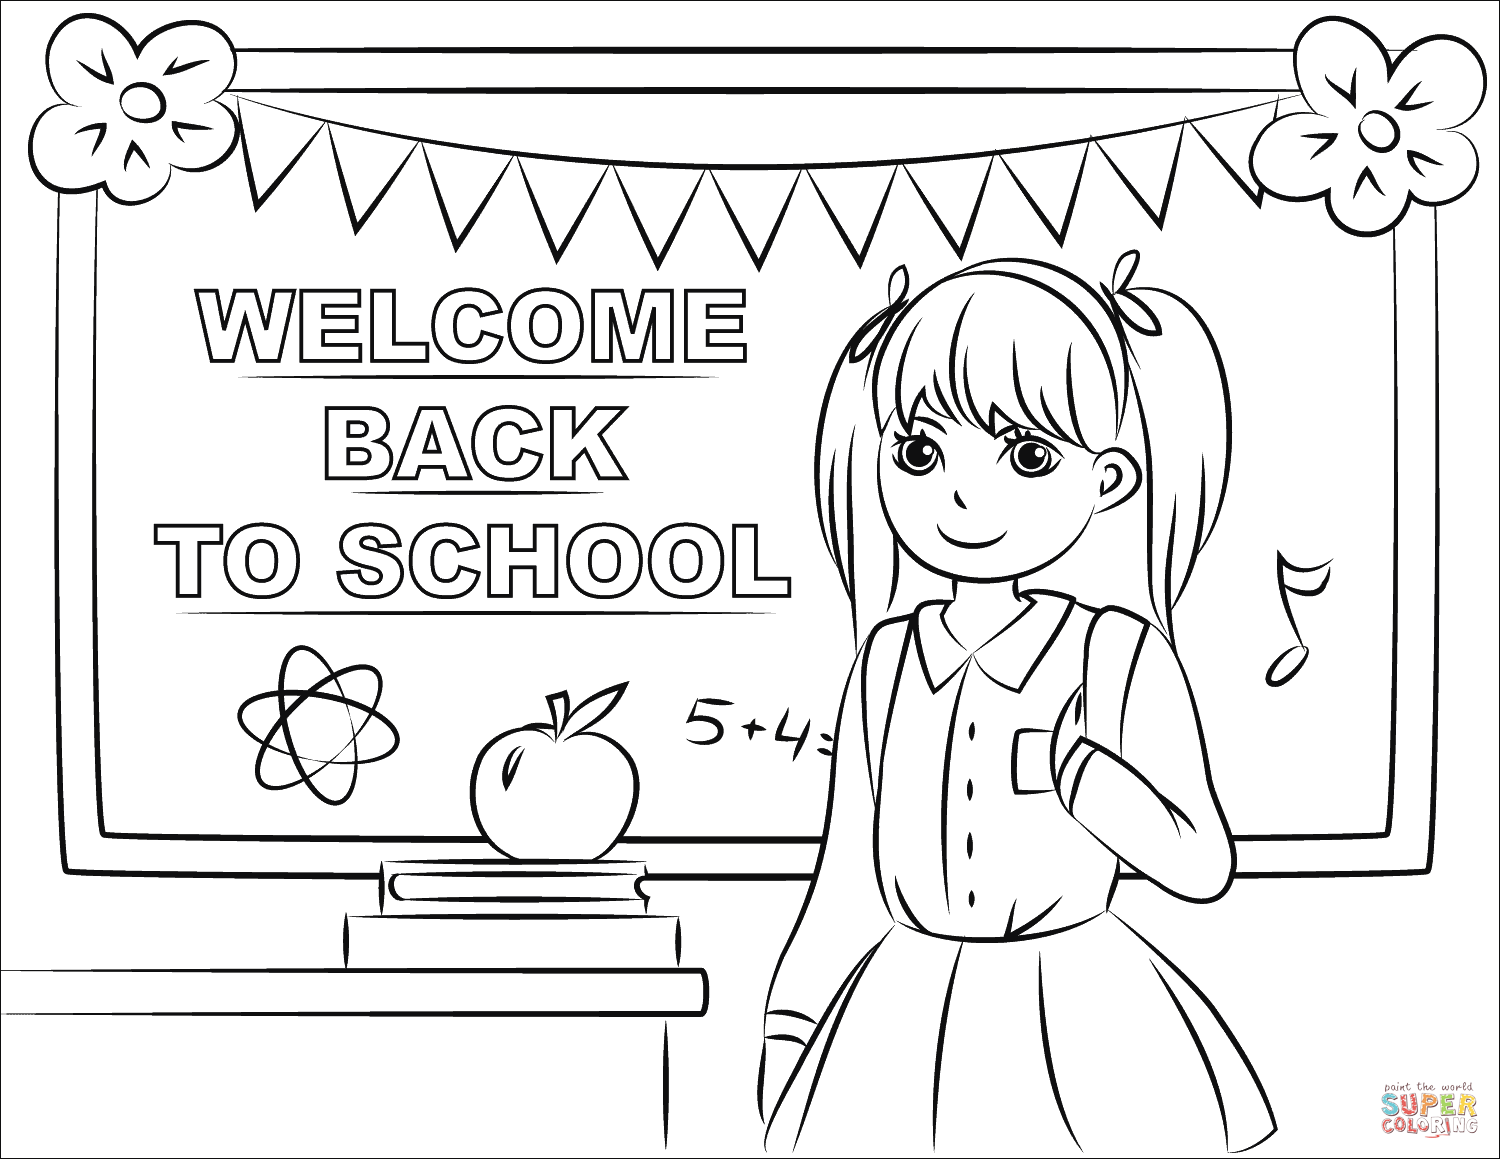 Wele back to school coloring page free printable coloring pages